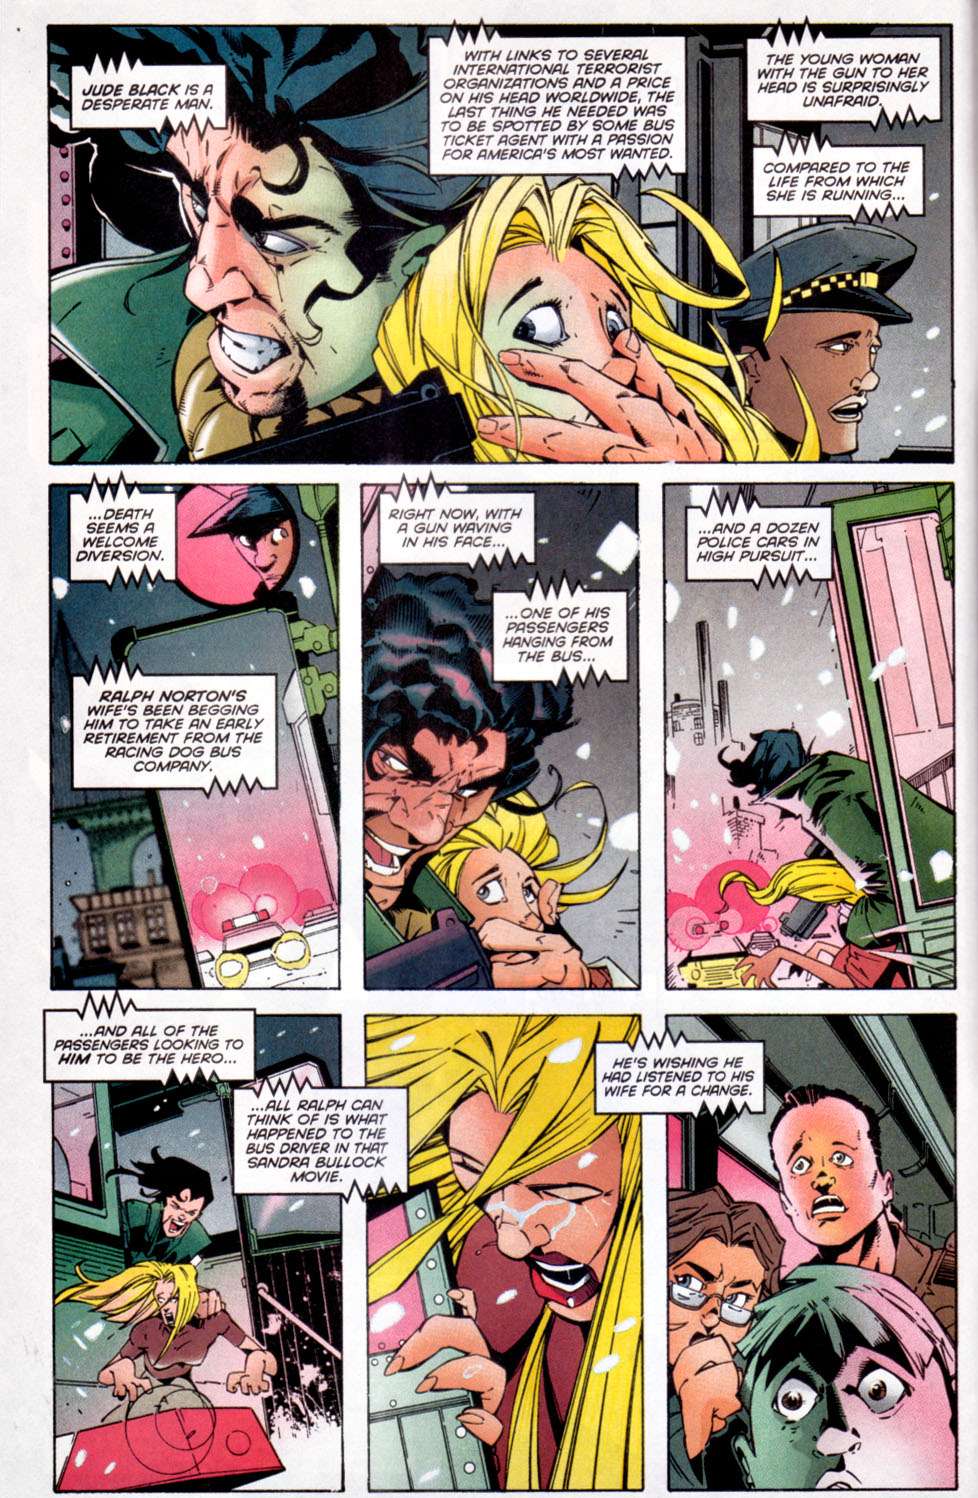 X-Factor (1986) 143 Page 2